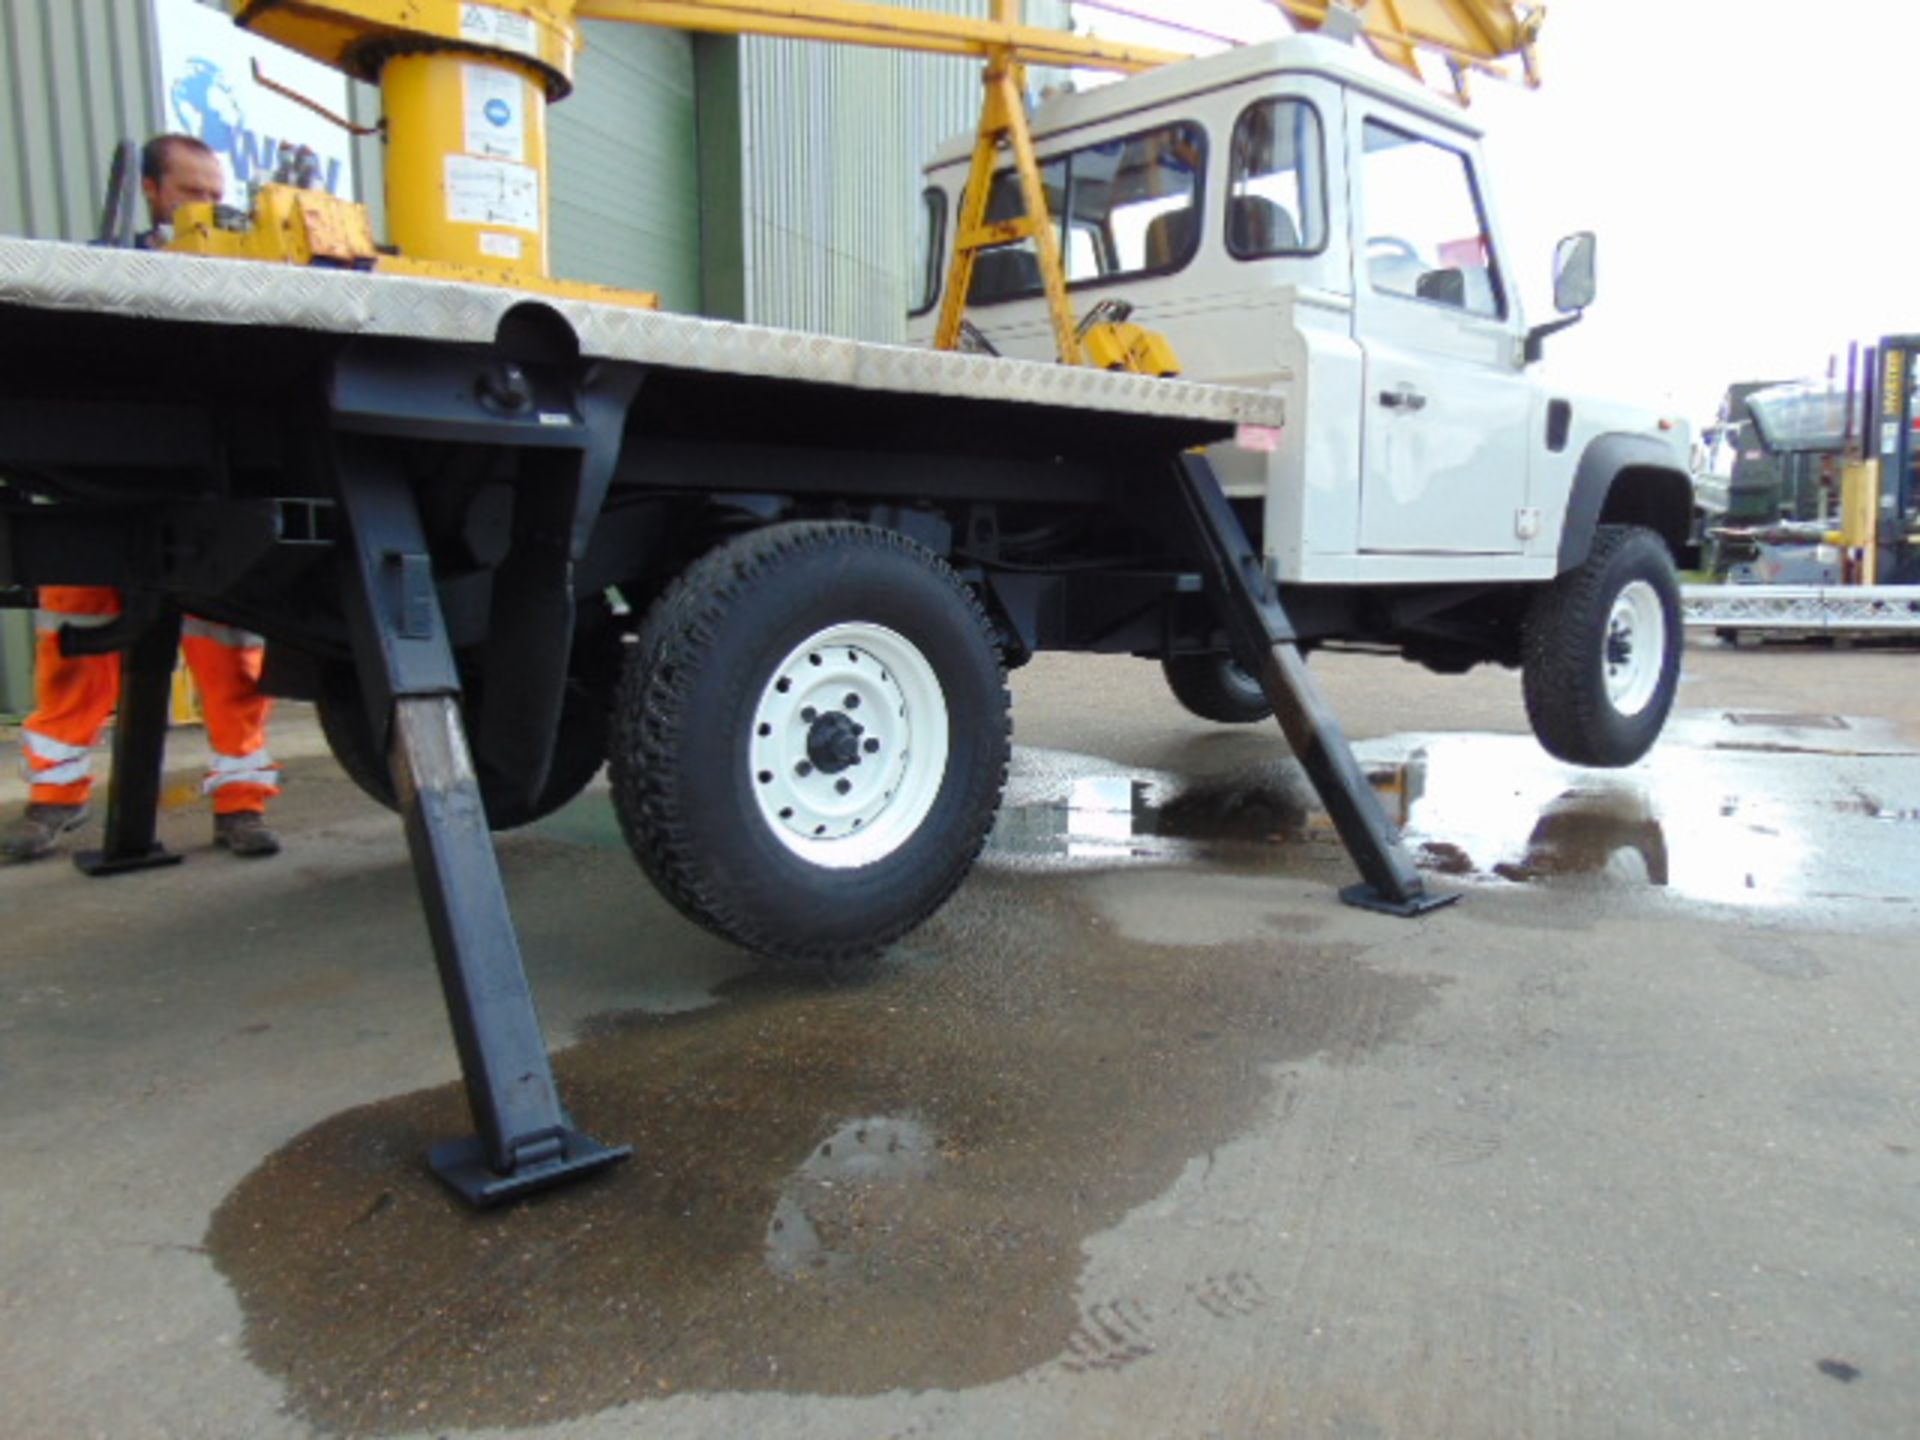 2010 Land Rover Defender 130 2.4 Puma Cherry Picker / Access Lift ONLY 83,760 MILES! - Image 19 of 32